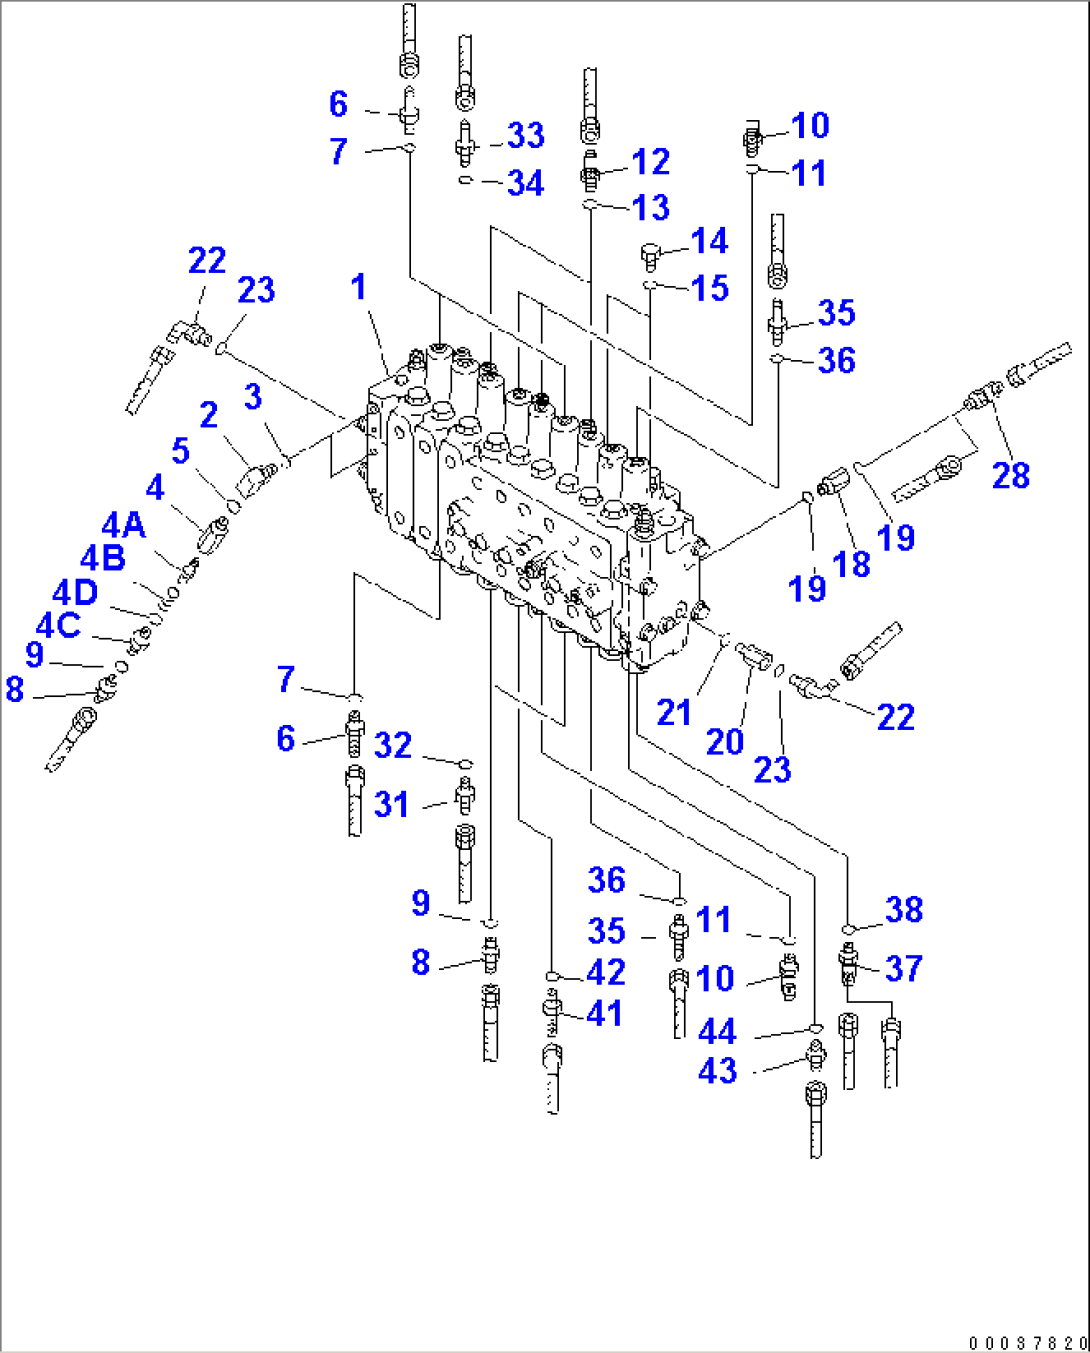 MAIN VALVE (CONNECTING PARTS)